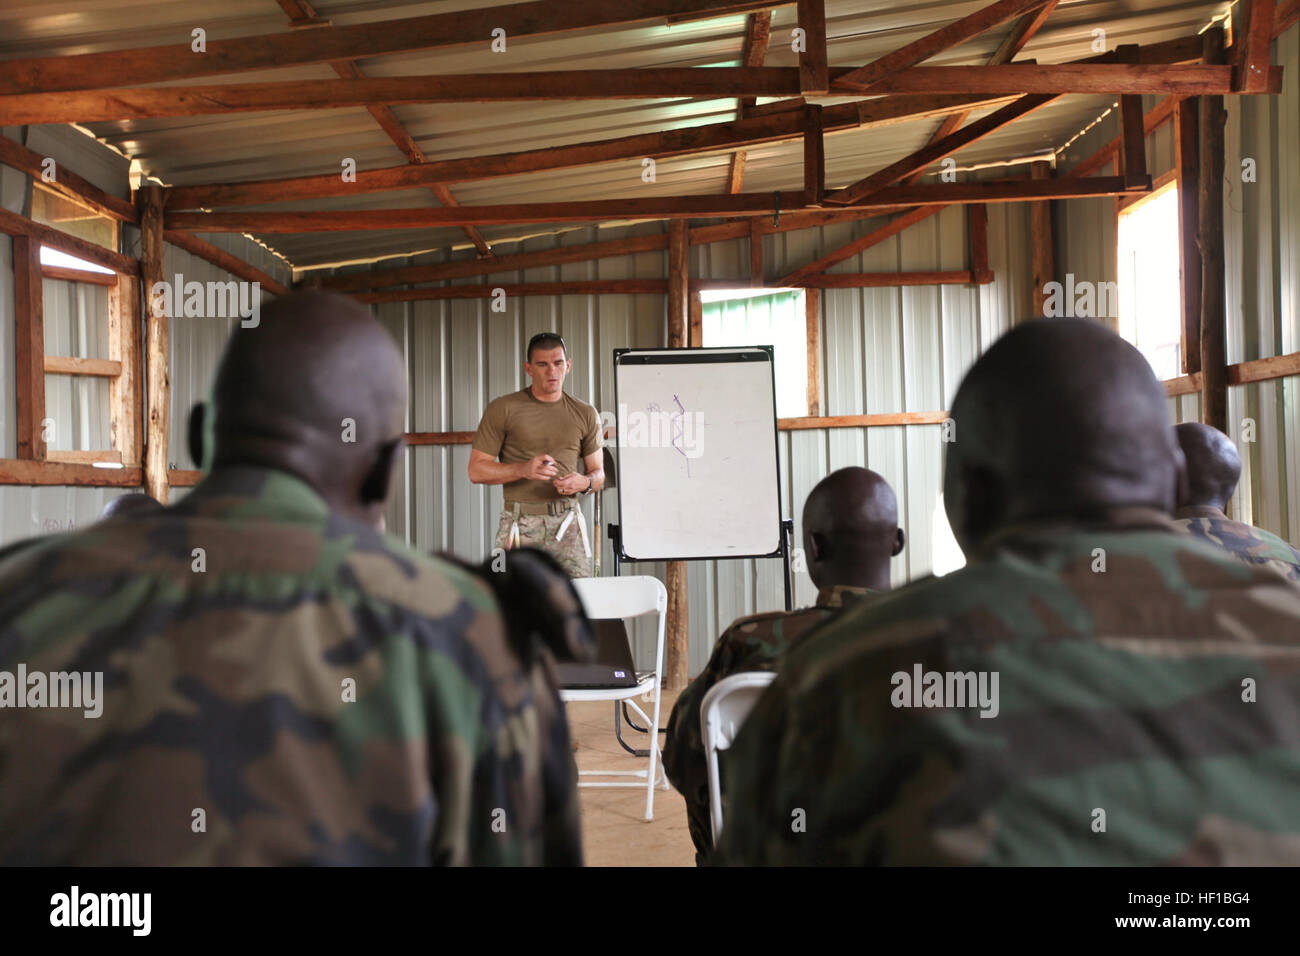 U.S. Navy Explosive Ordinance Disposal 1st Class Mark Balliet, an EOD technician with Combined Joint Task Force-Horn of Africa (CJTF-HOA), explains counter-IED tactics to a group of Uganda People’s Defense Force (UPDF) soldiers at the Peace Support Operations Training Center-Singo in Kakola, Uganda, June 24, 2013. Balliet and Marines and Sailors with Special-Purpose Marine Air-Ground Task Force (MAGTF) Africa recently completed a logistics focused engagement with UPDF soldiers who will deploy to Somalia later this year. Since deploying in January, Special-Purpose MAGTF Africa has trained more  Stock Photo